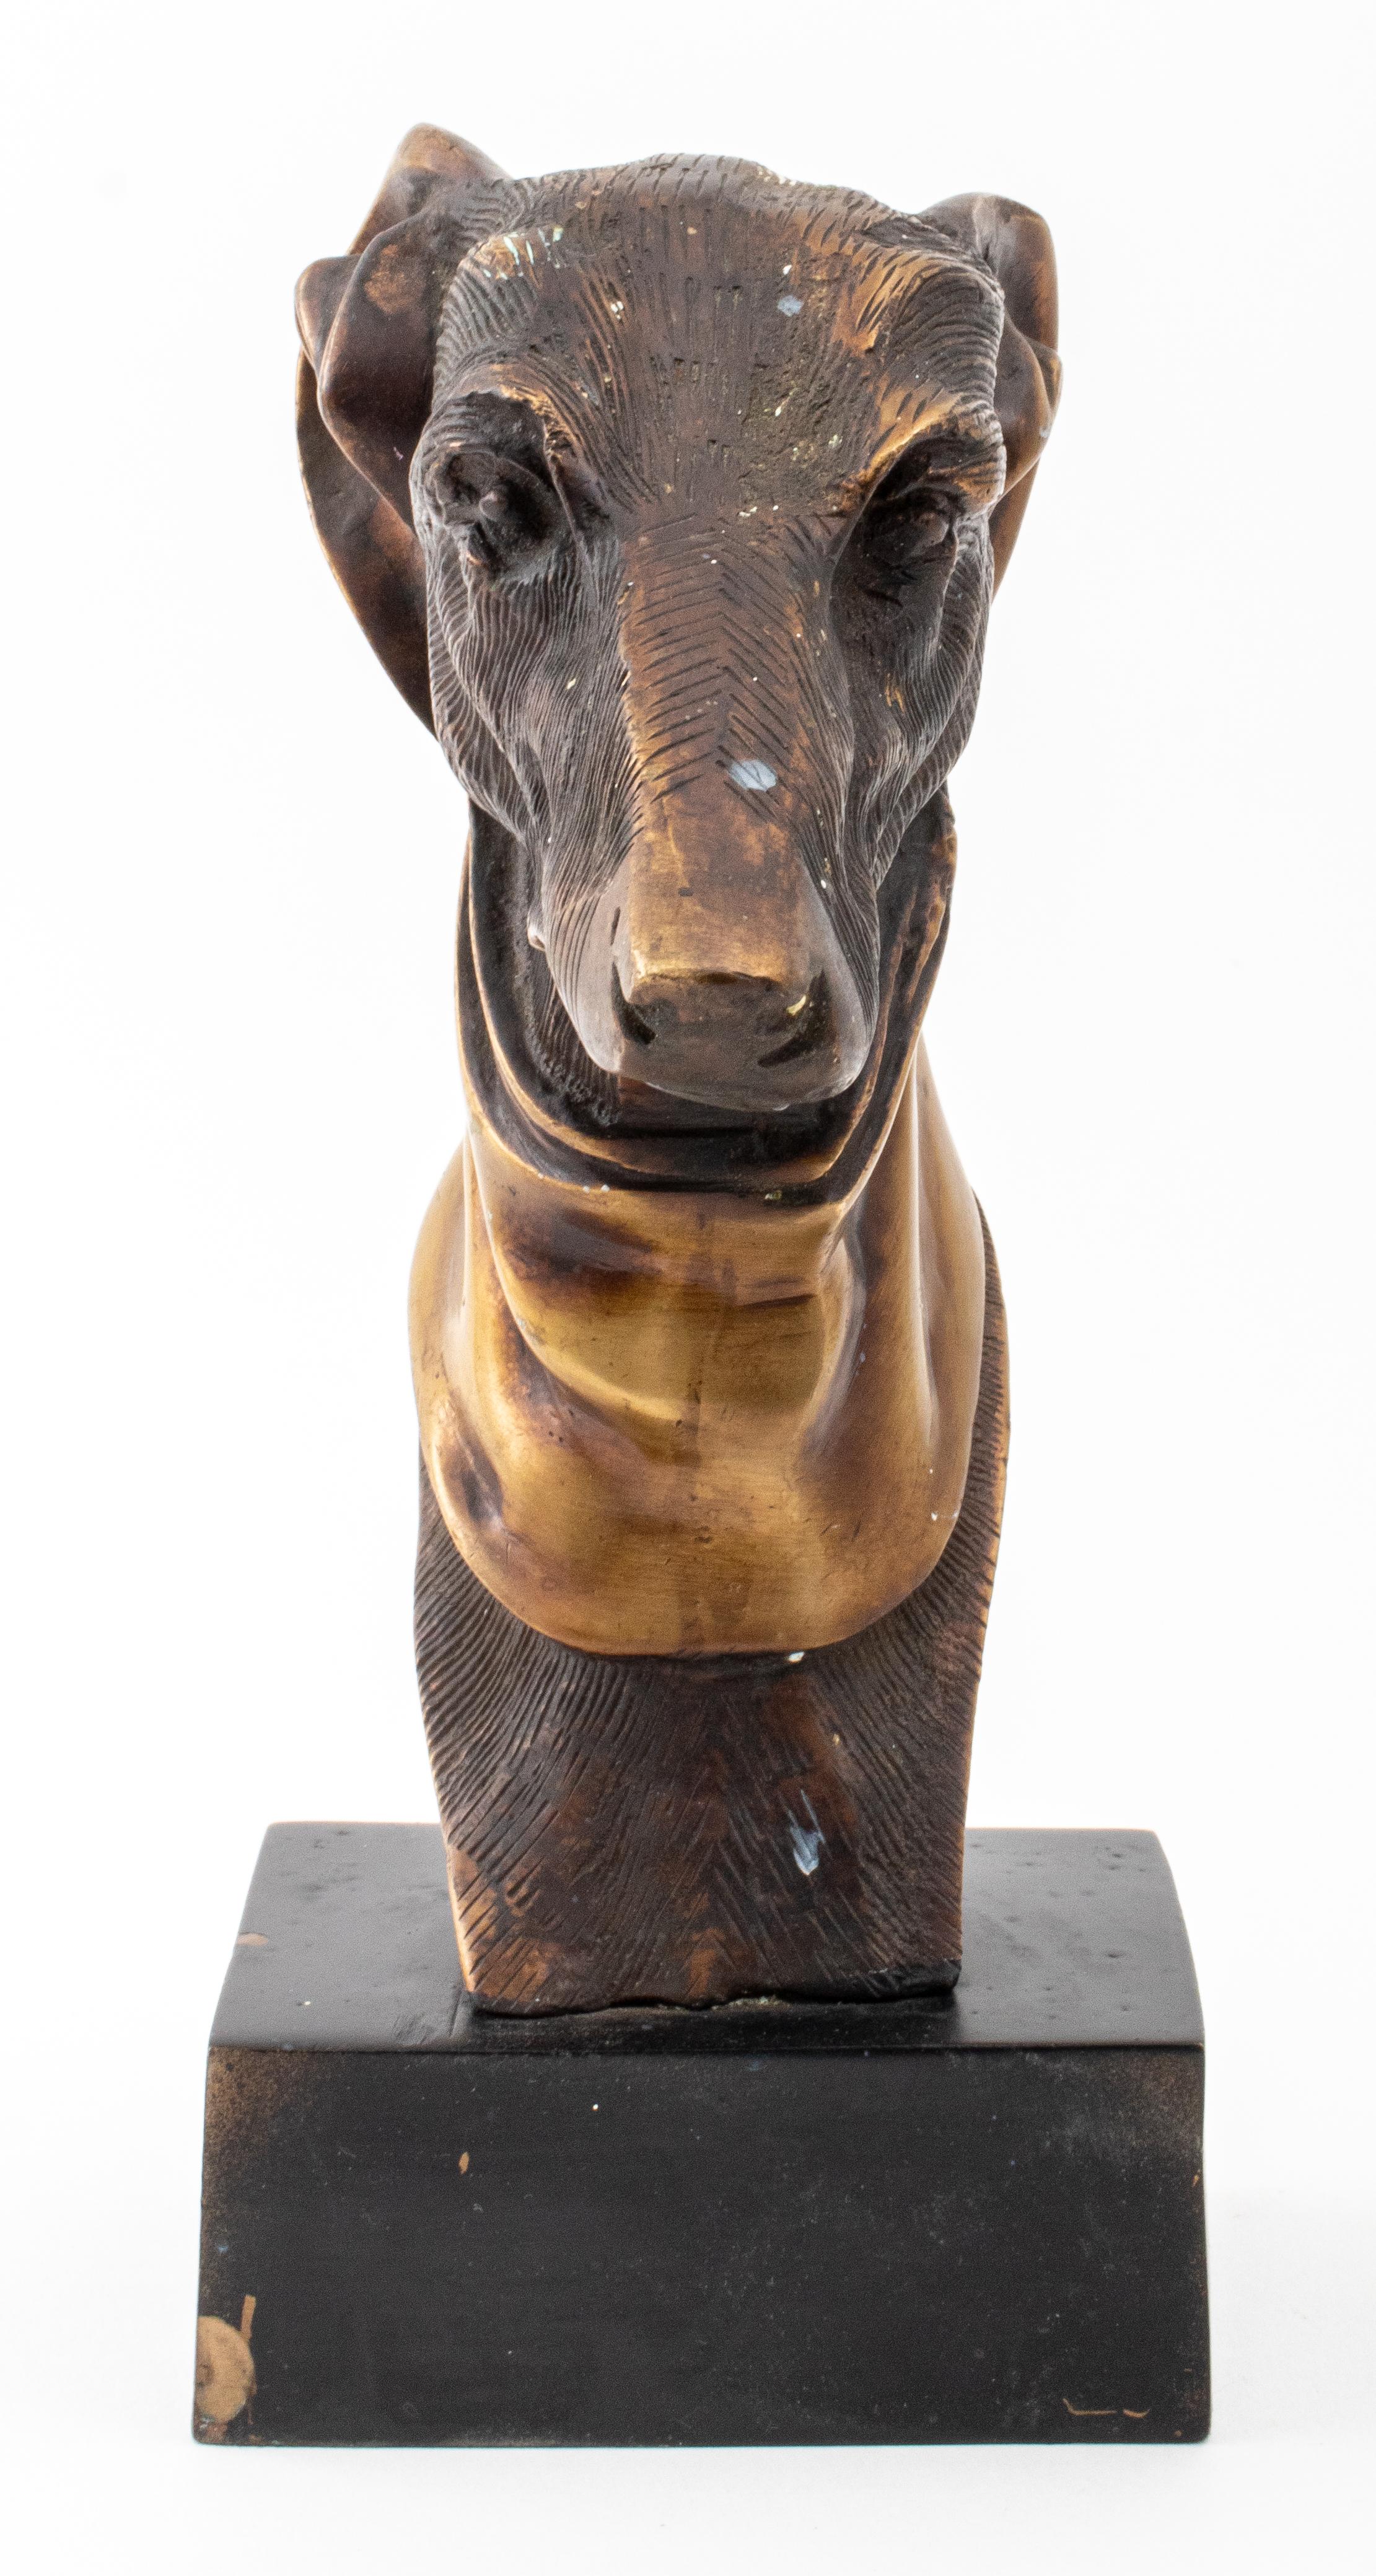 Bronze bust of a greyhound dog, unsigned. Measures: 9